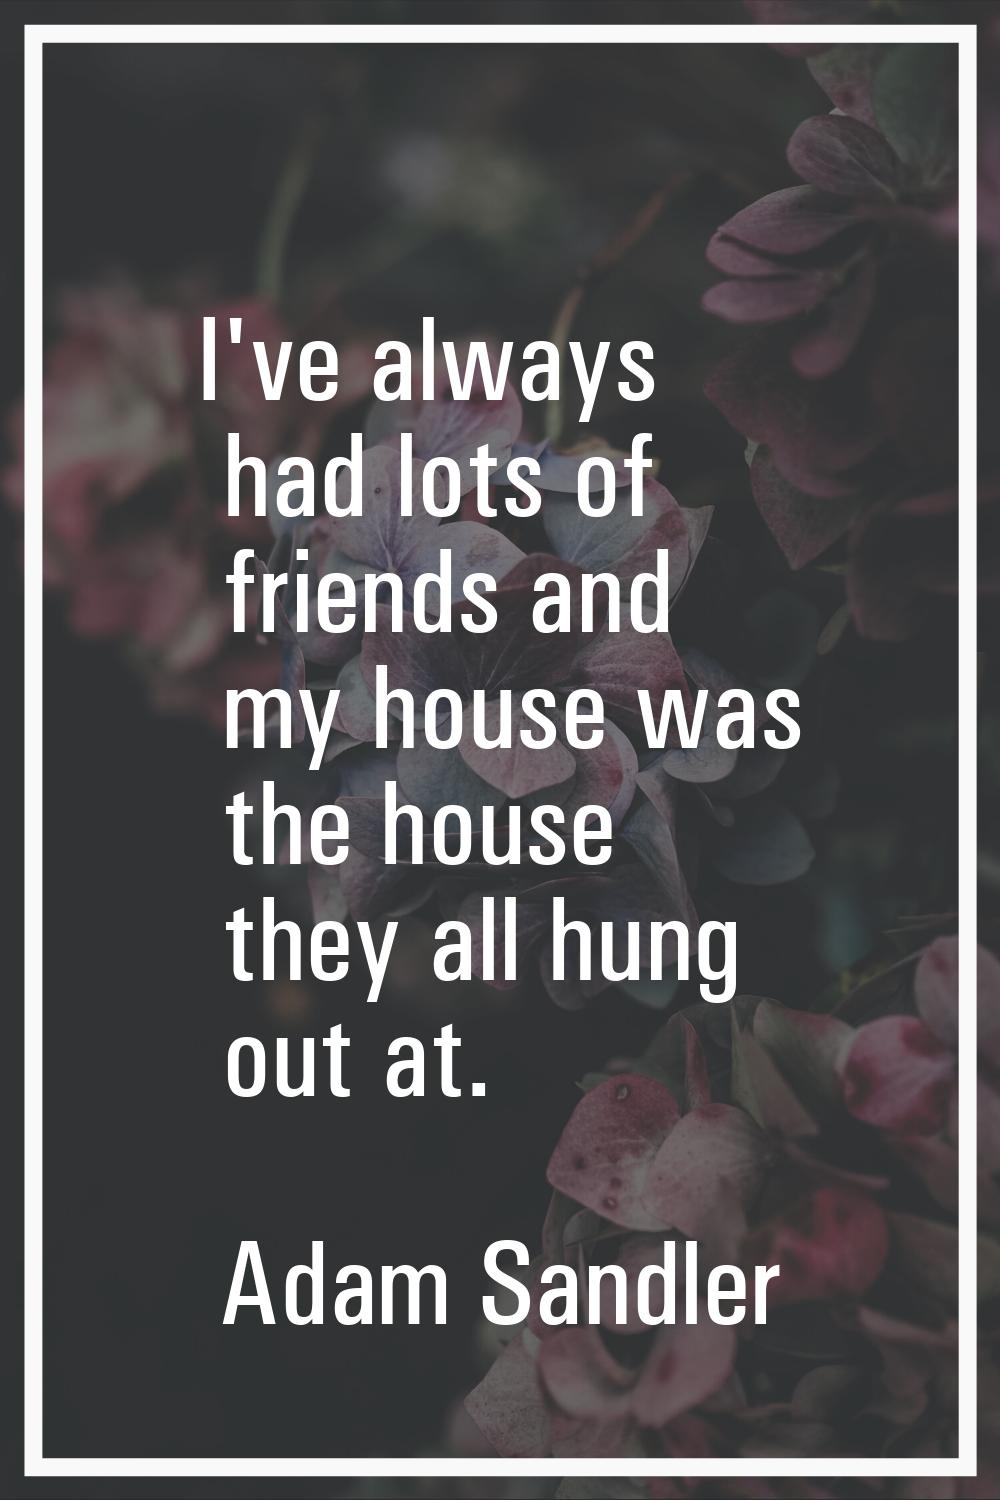 I've always had lots of friends and my house was the house they all hung out at.